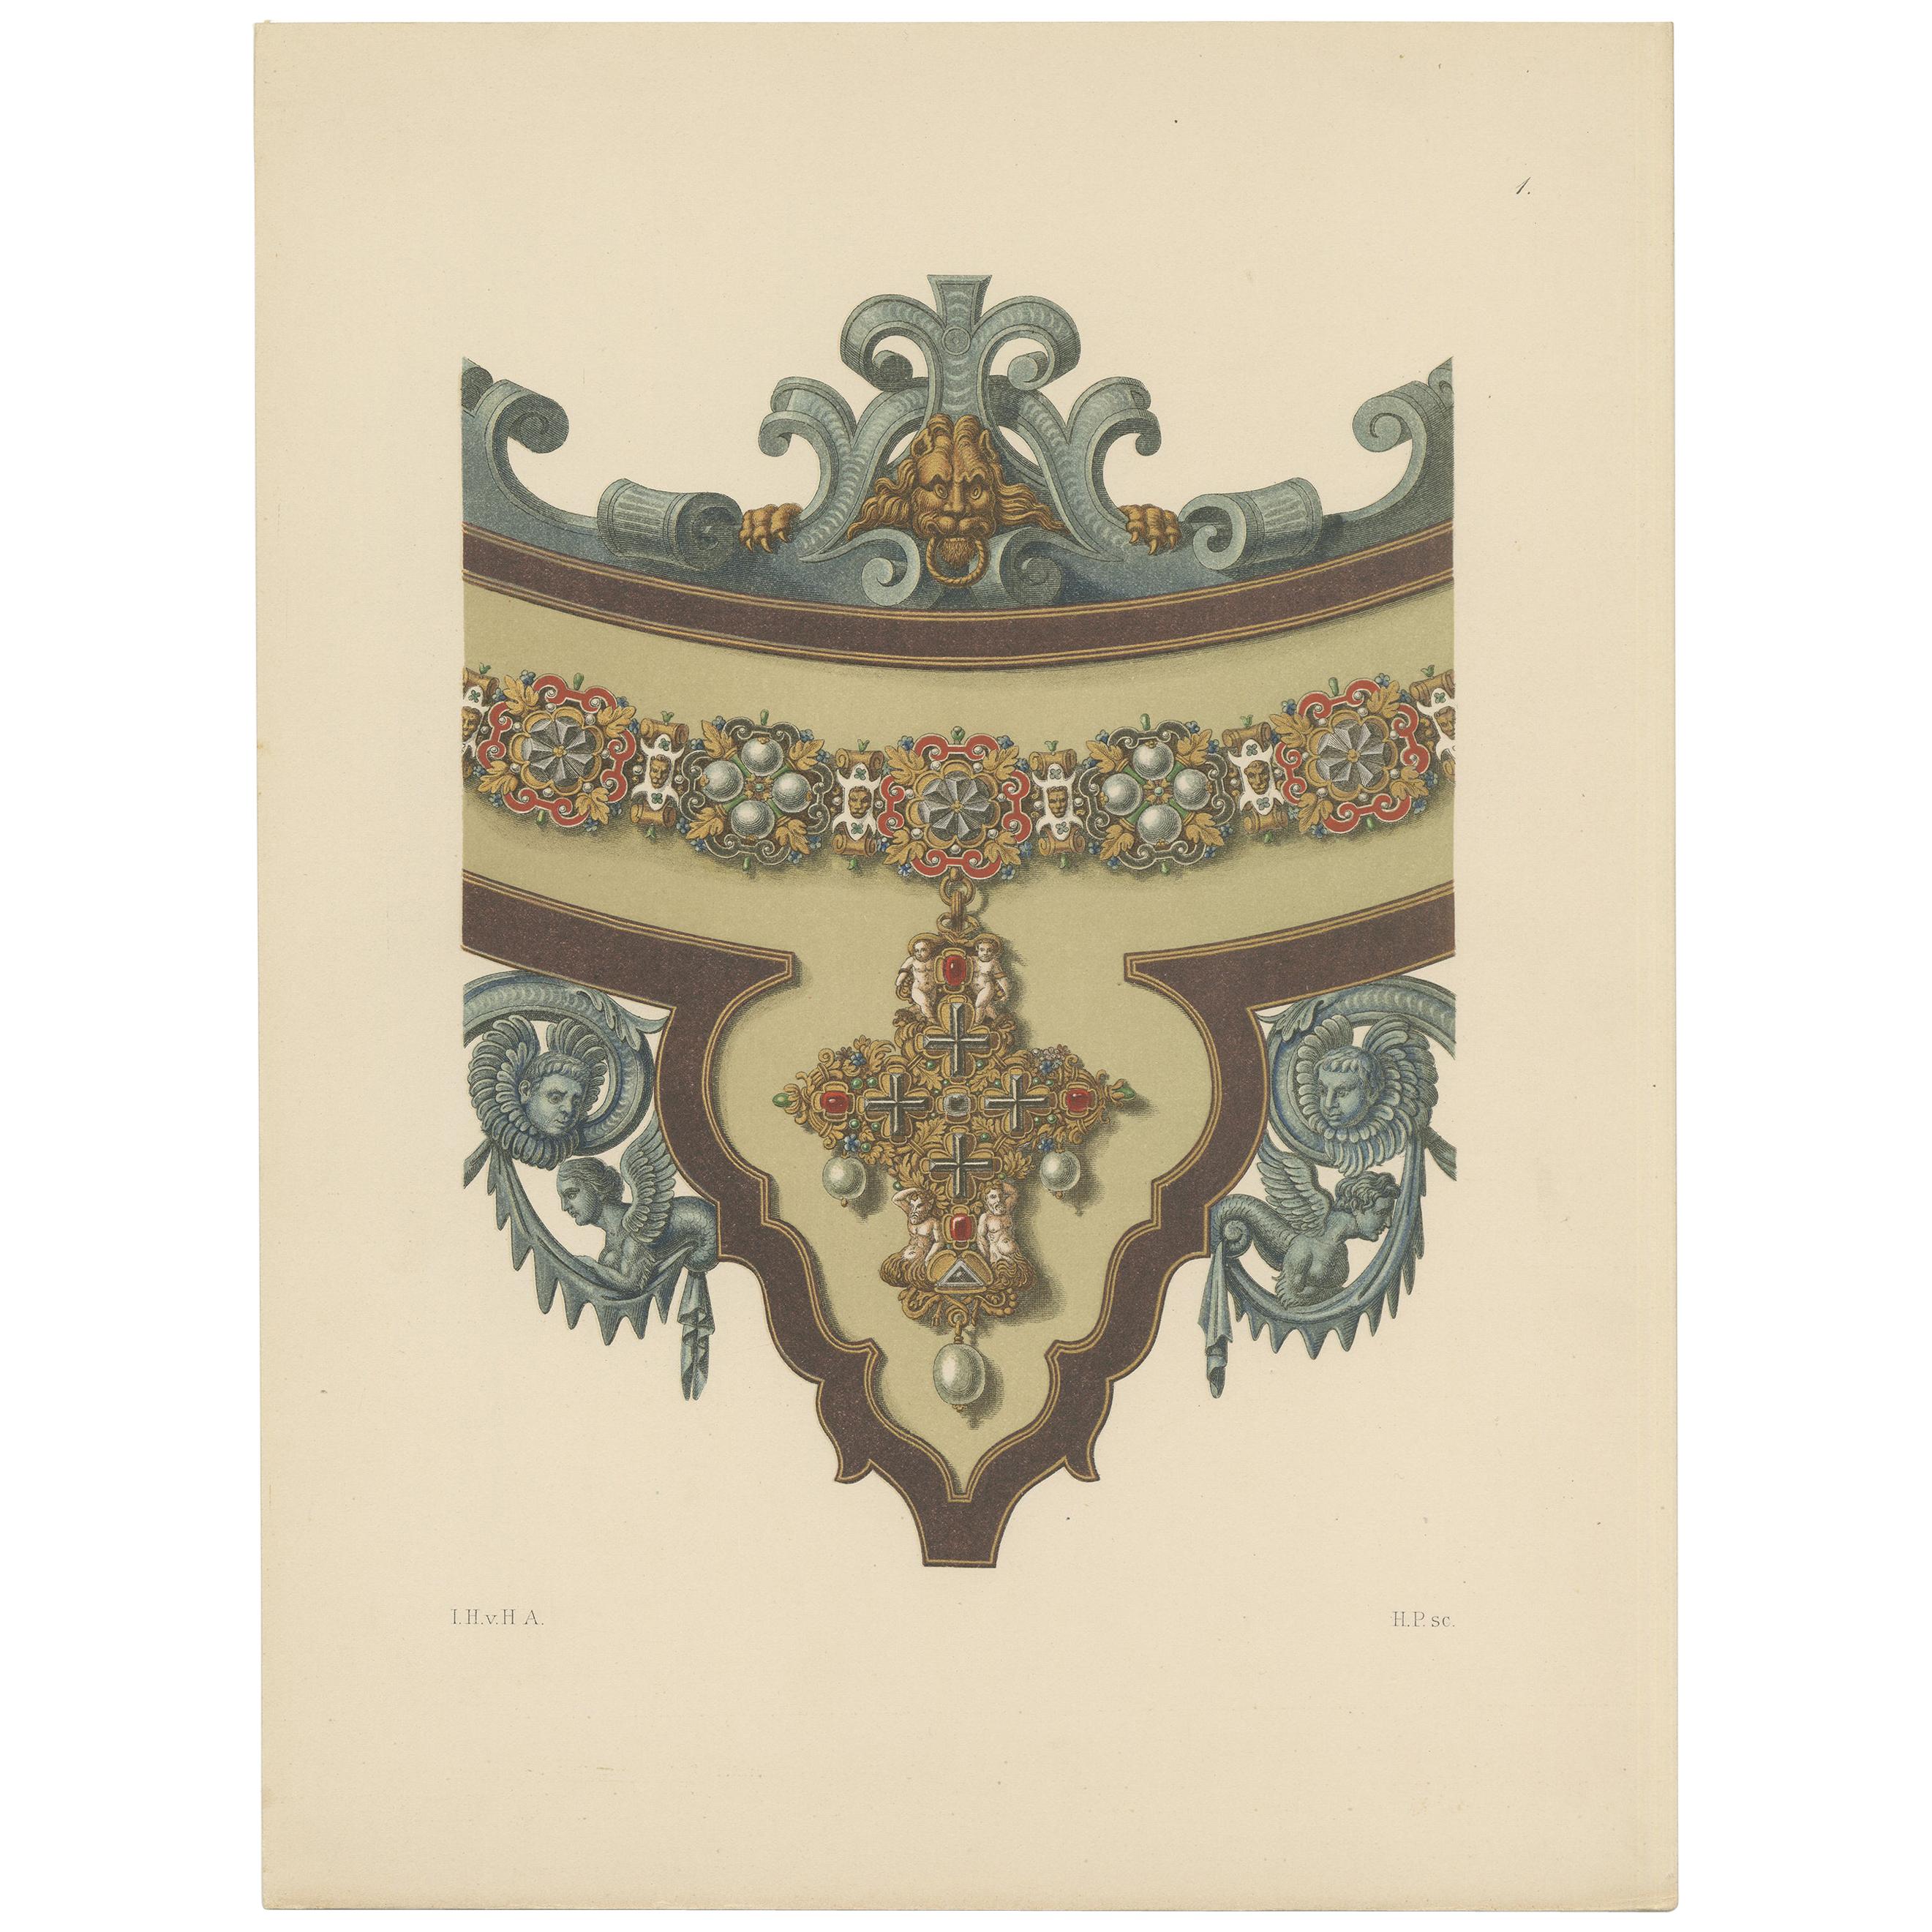 Antique Print of the Center of a Necklace by Hefner-Alteneck, 1890